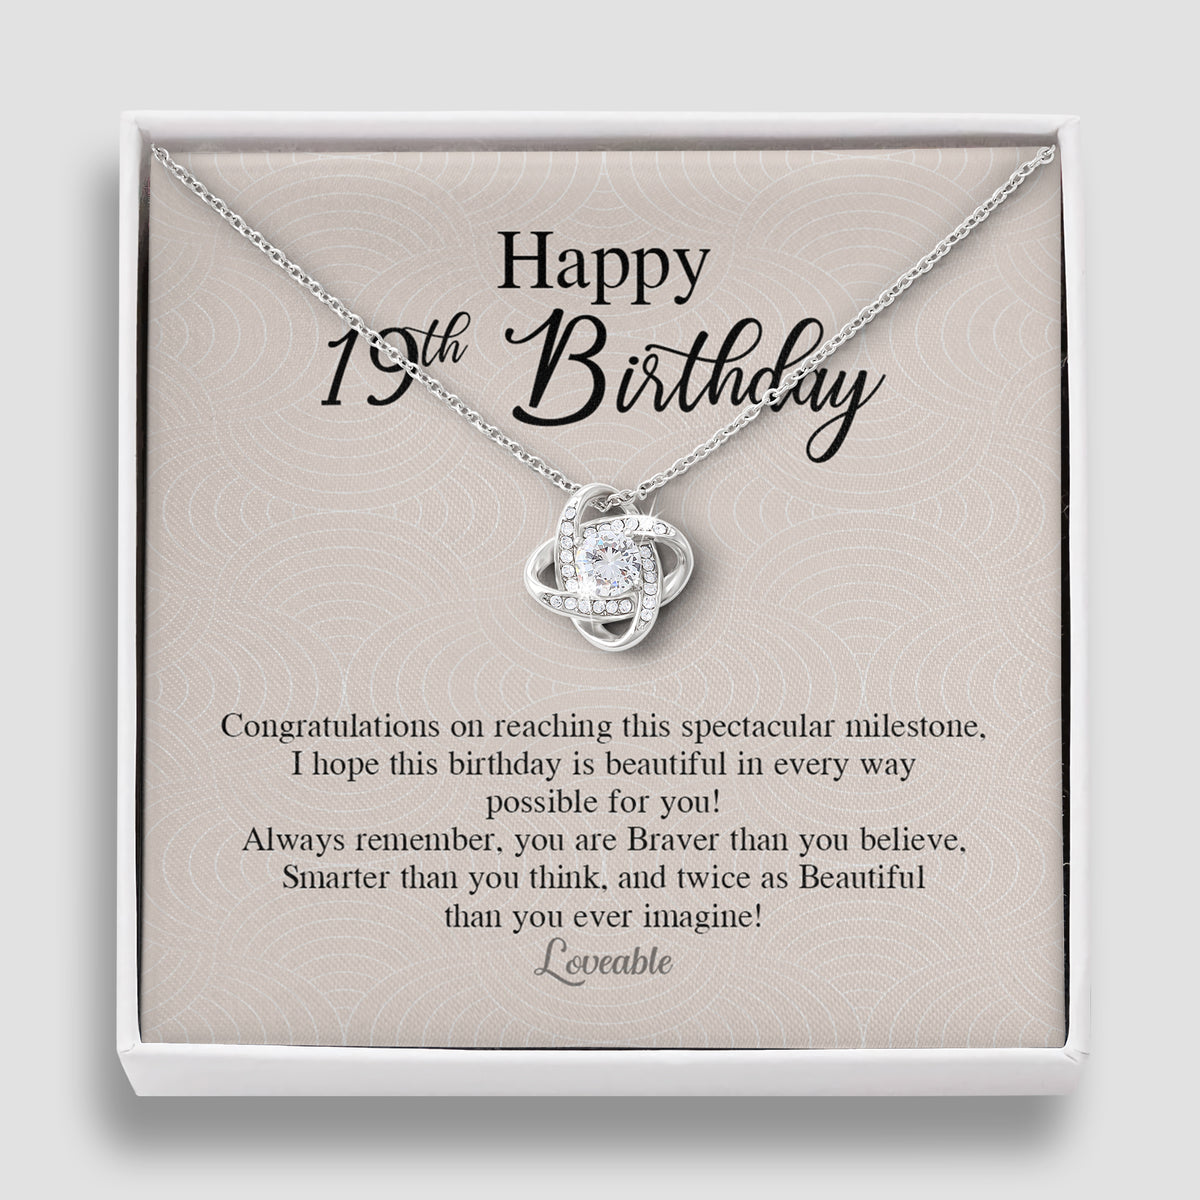 Congratulation on reaching this spectacular milestone - Personalized Necklace - 19th Birthday Gift